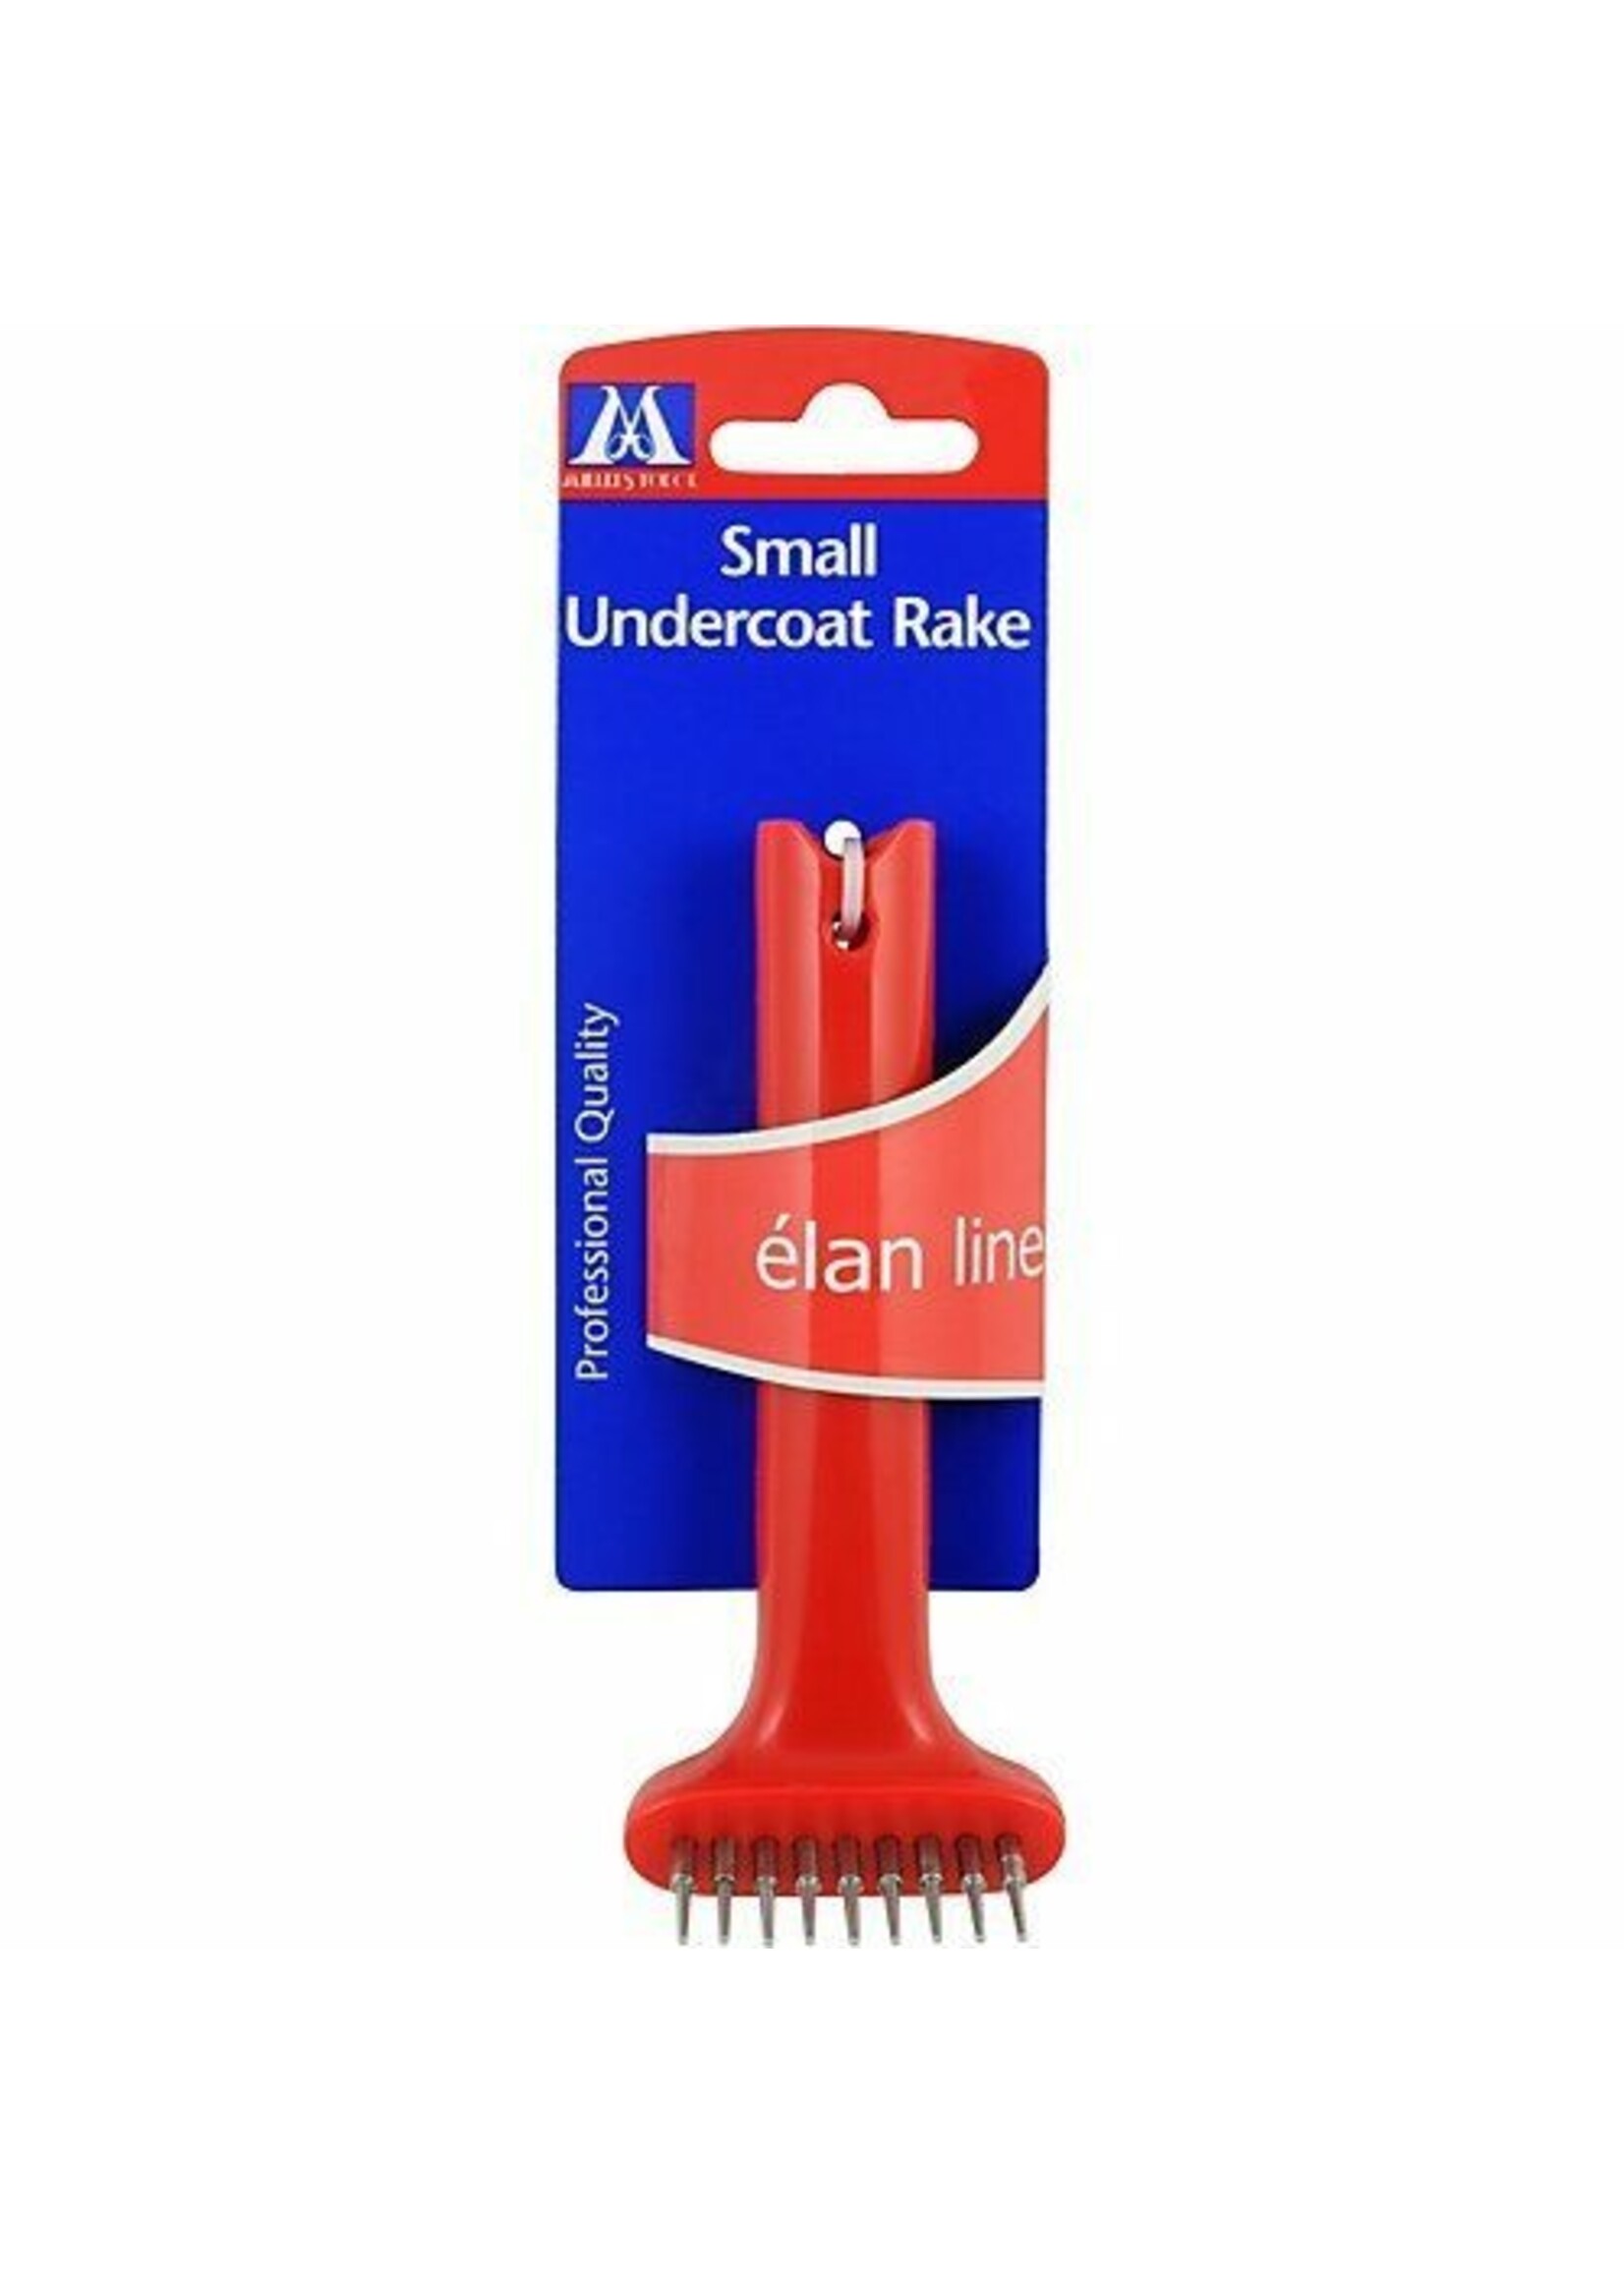 Millers Forge Millers Forge Undercoat Rake Small 950E